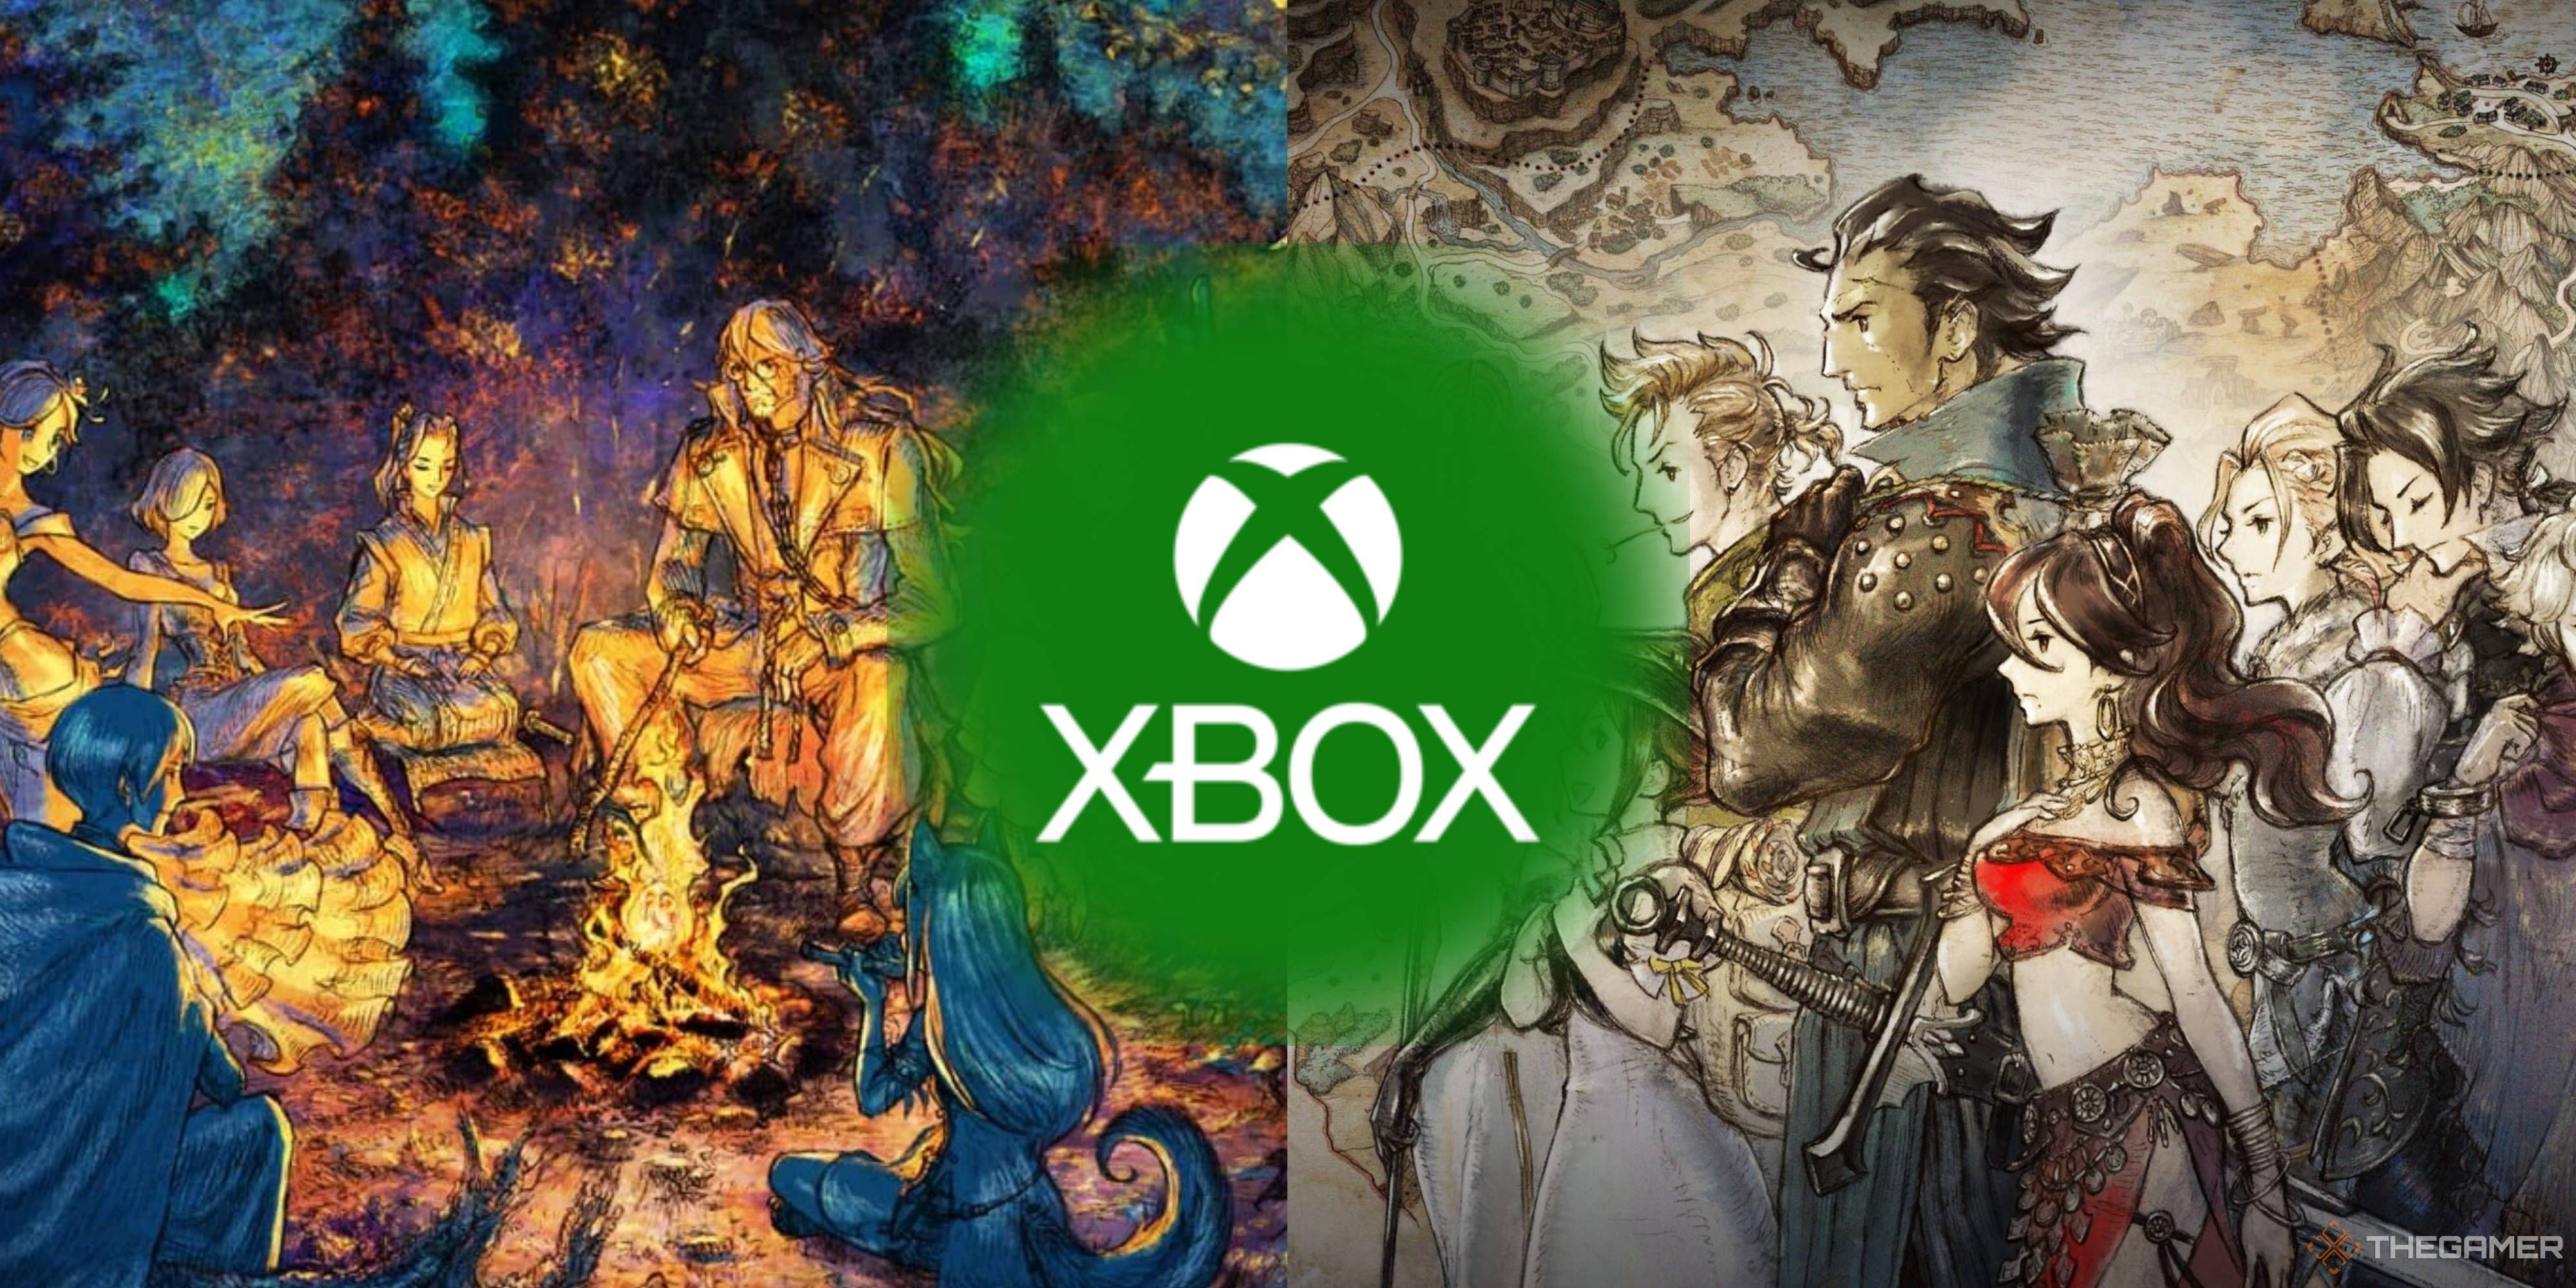 octopath traveler and octopath traveler 2 with an xbox logo in the middle